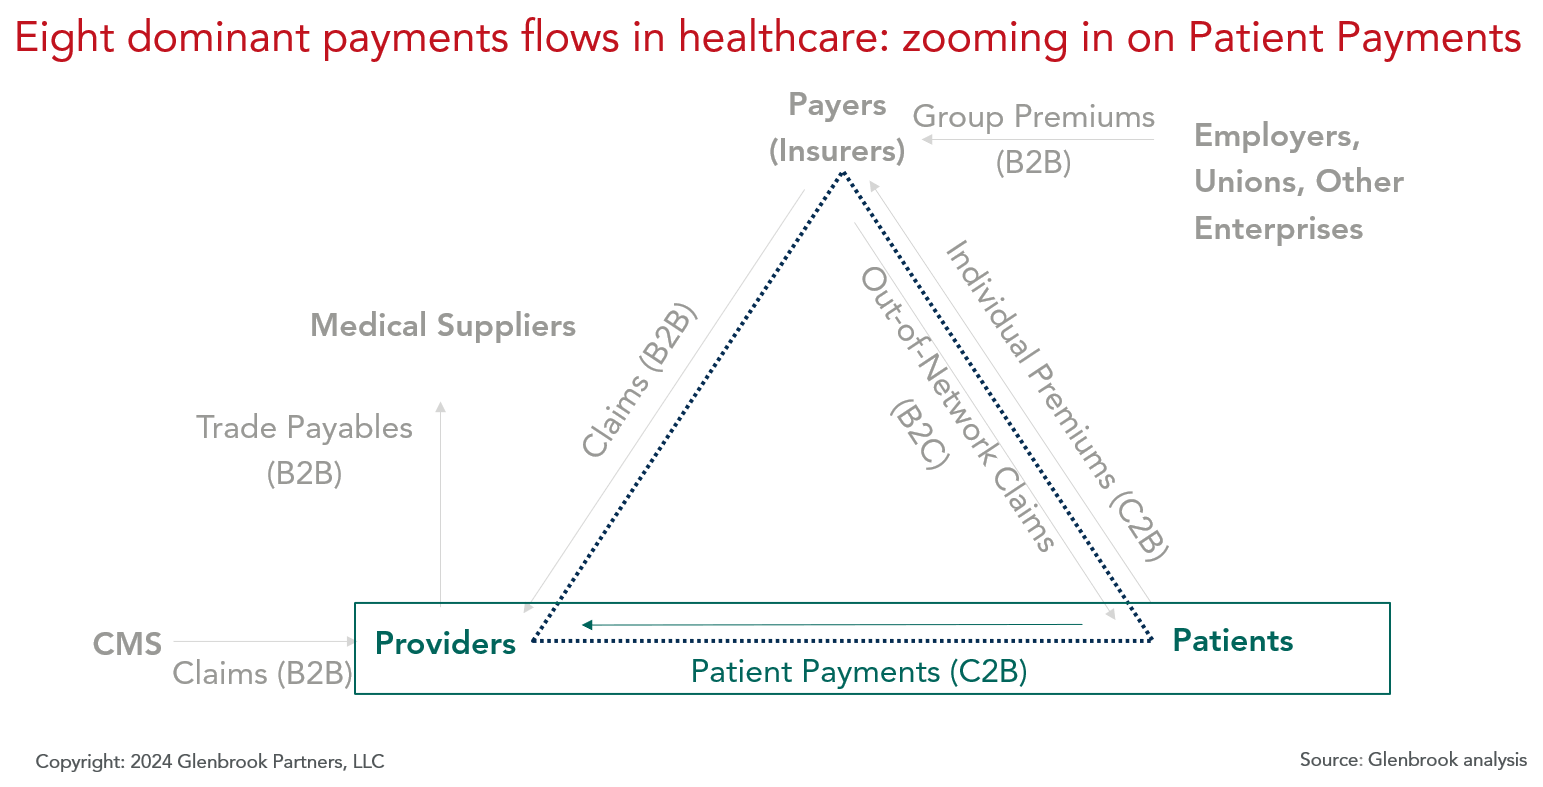 8 dominant payments flows in healthcare: zooming in on Patient Payments